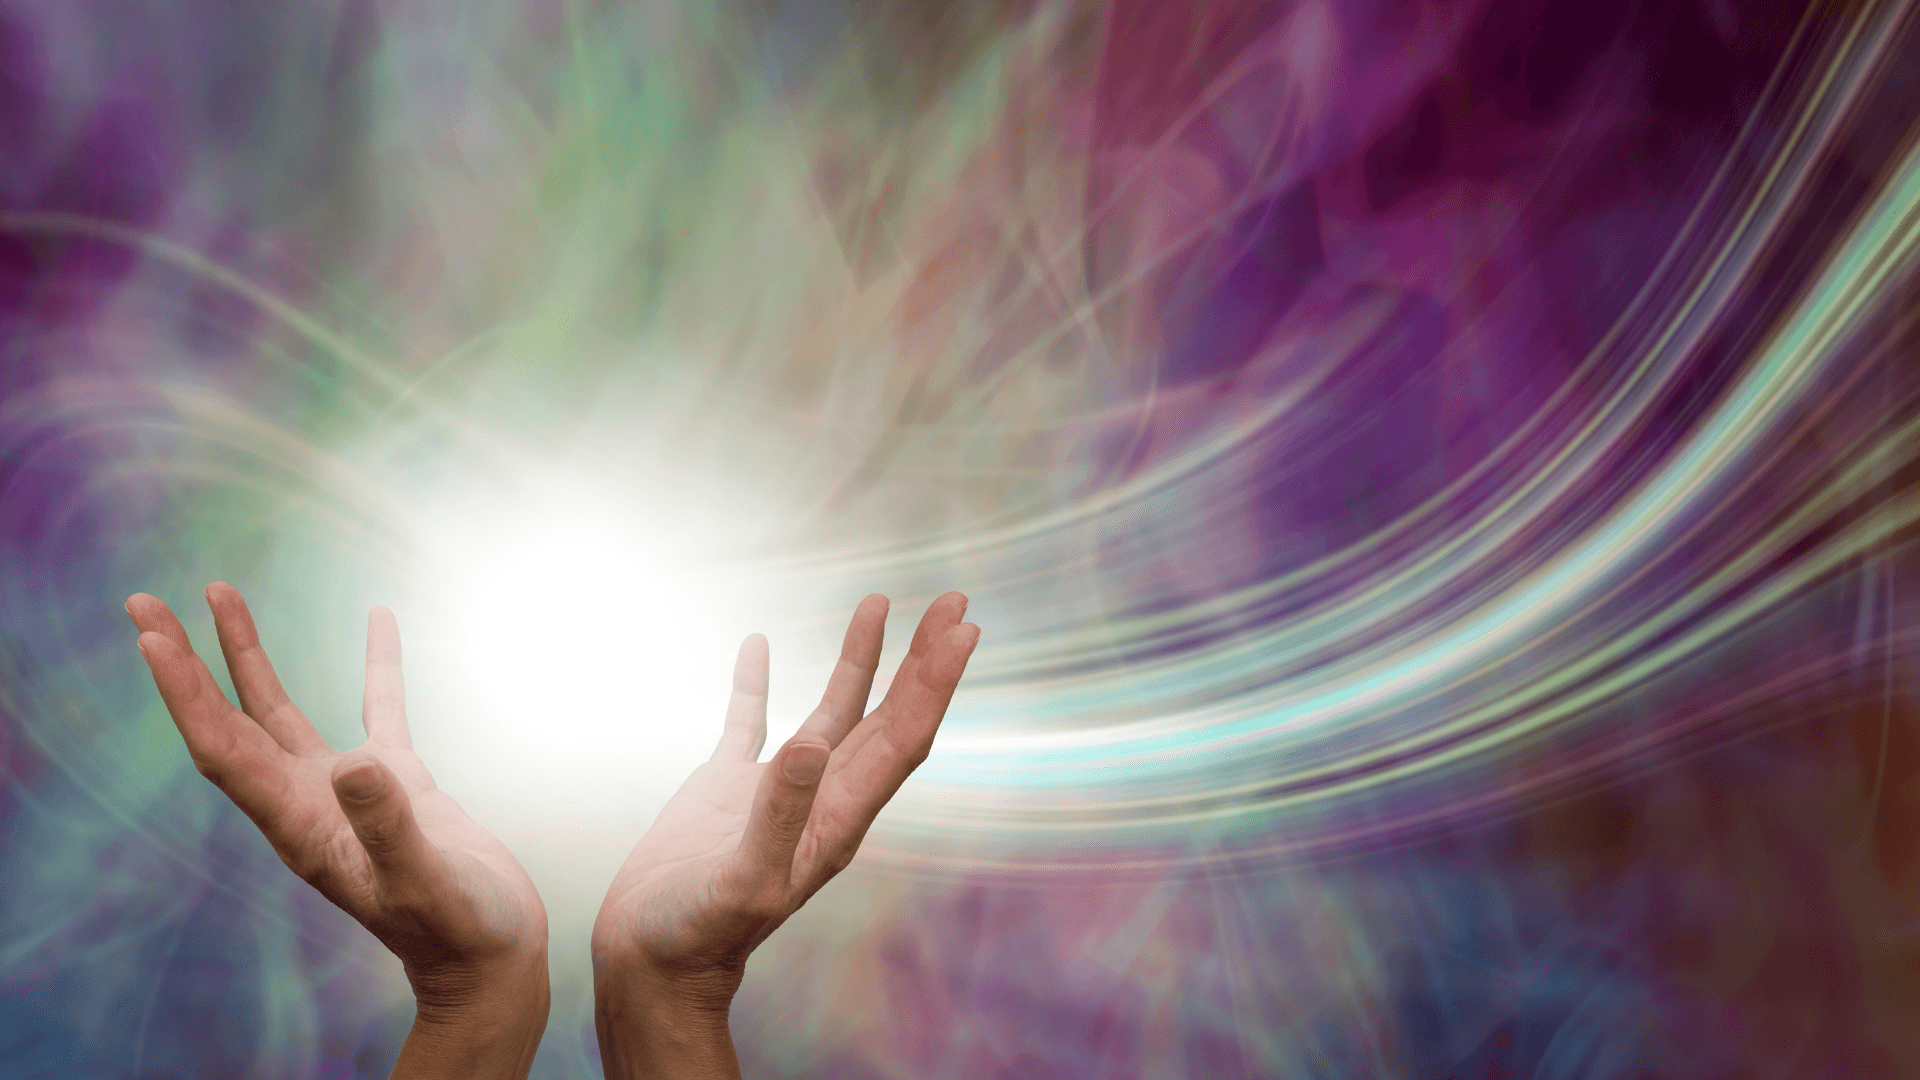 Benefits of Reiki therapies, advantages and disadvantages